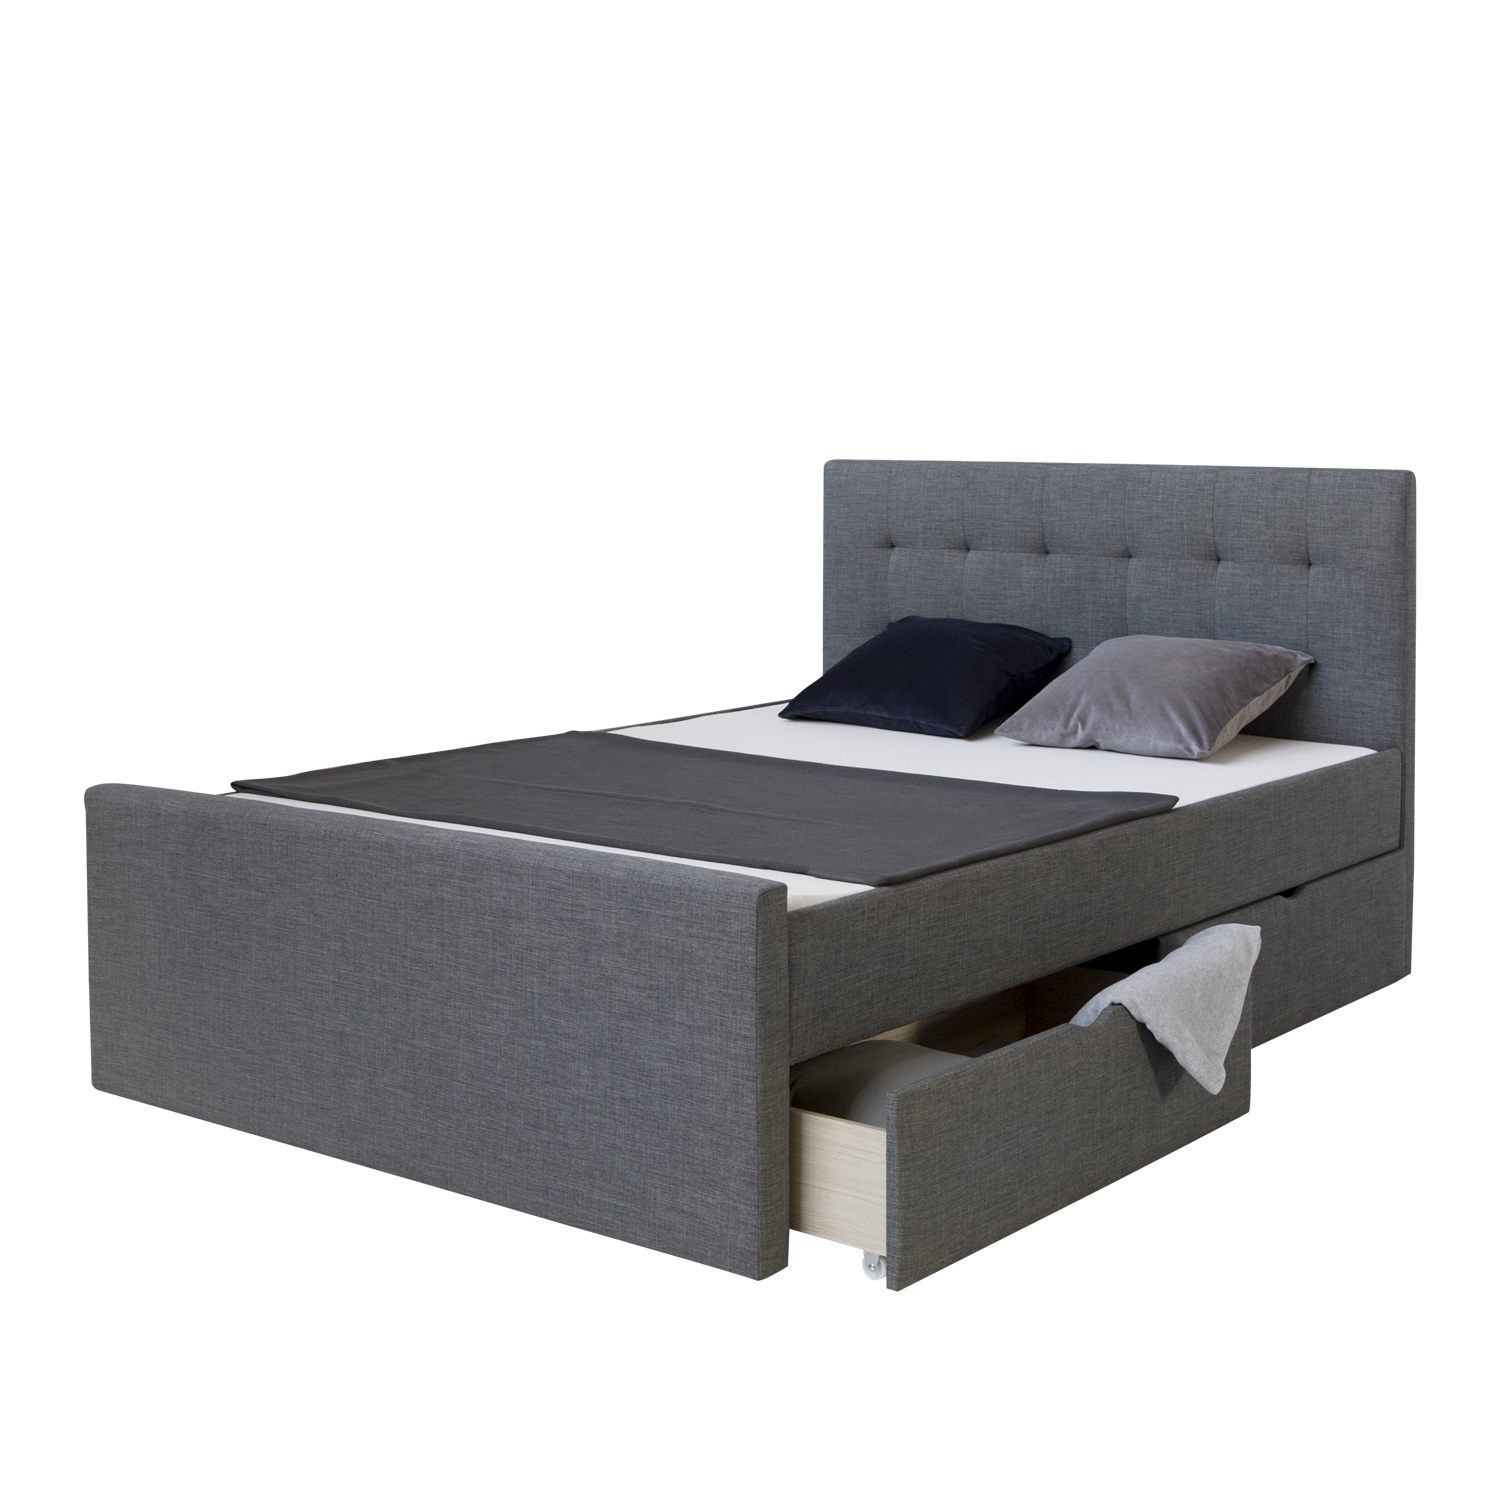 Upholstered bed rack 140 x 200 anthracite 2 Drawers